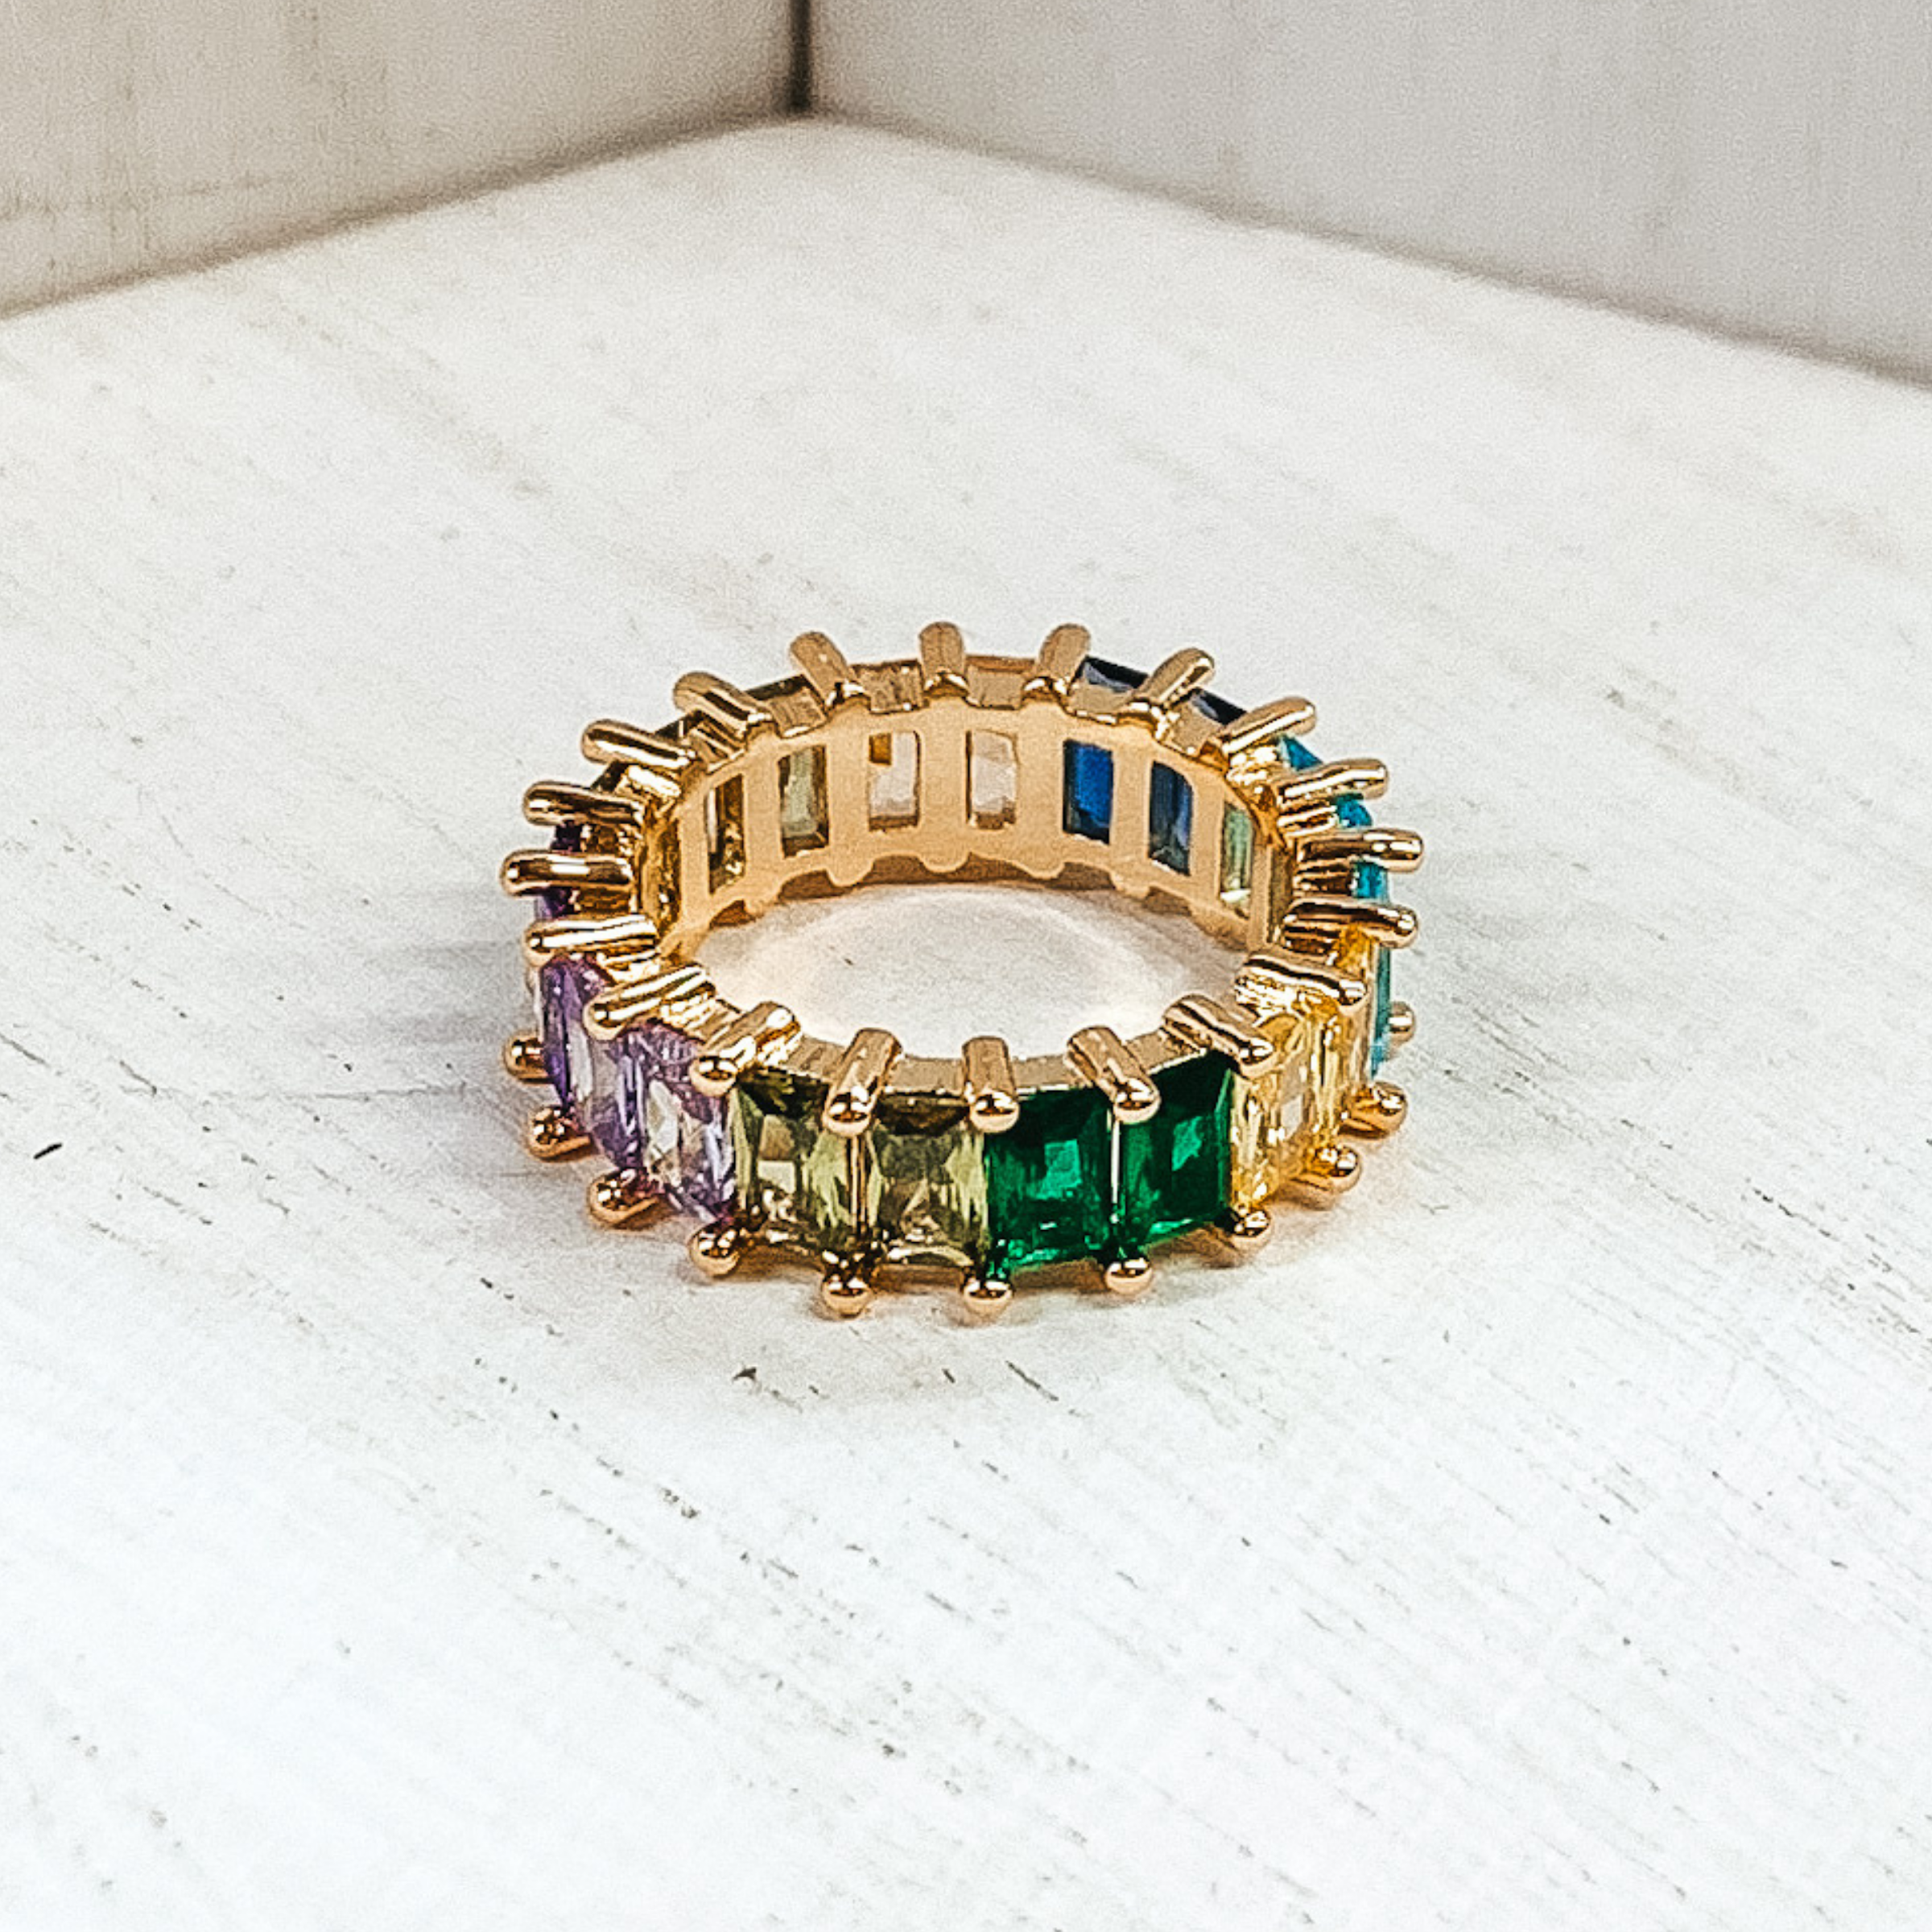 Gold Tone Ring with Baguette Crystals in Blue Multicolored